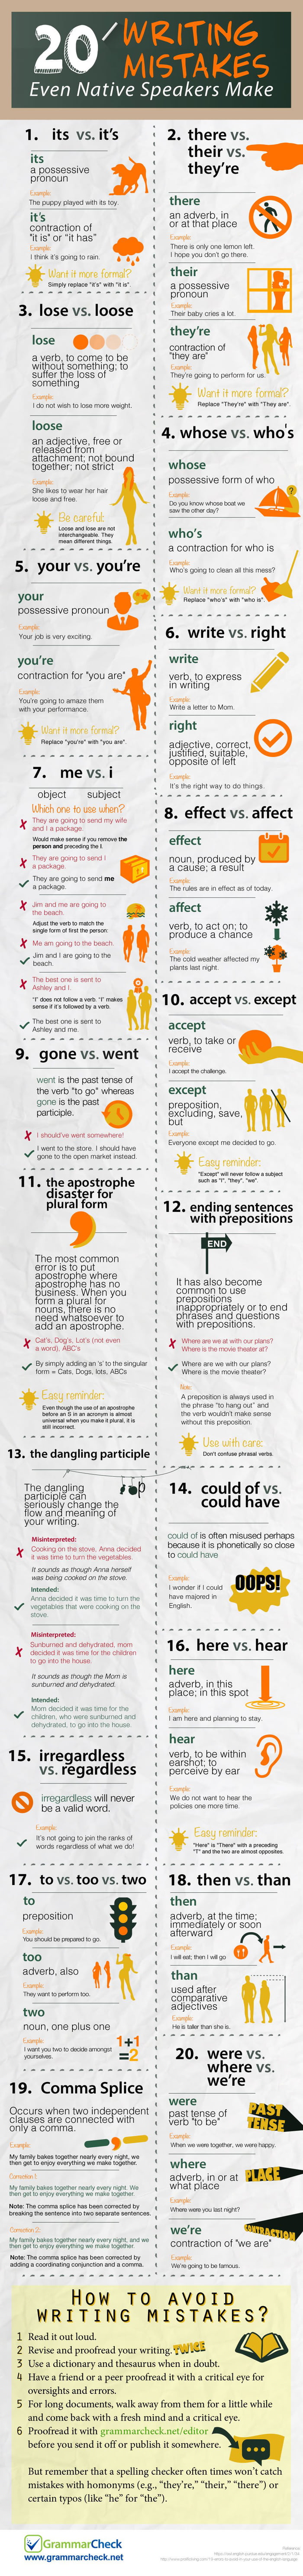 20 Writing Mistakes Even Native Speakers Make